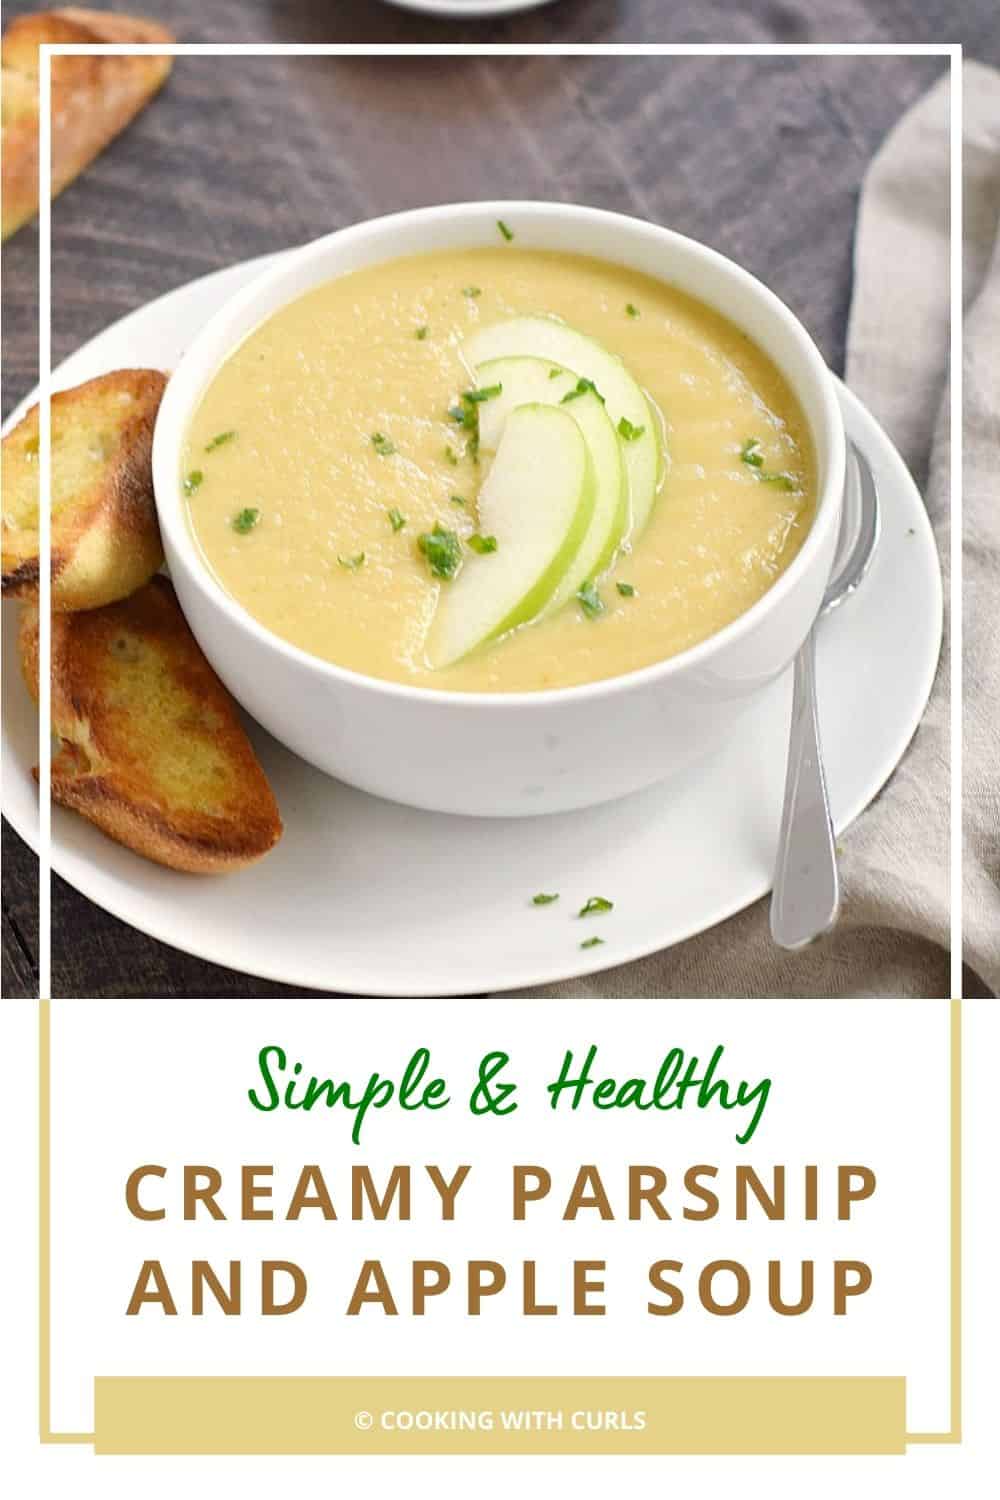 Creamy Parsnip and Apple Soup - Cooking with Curls